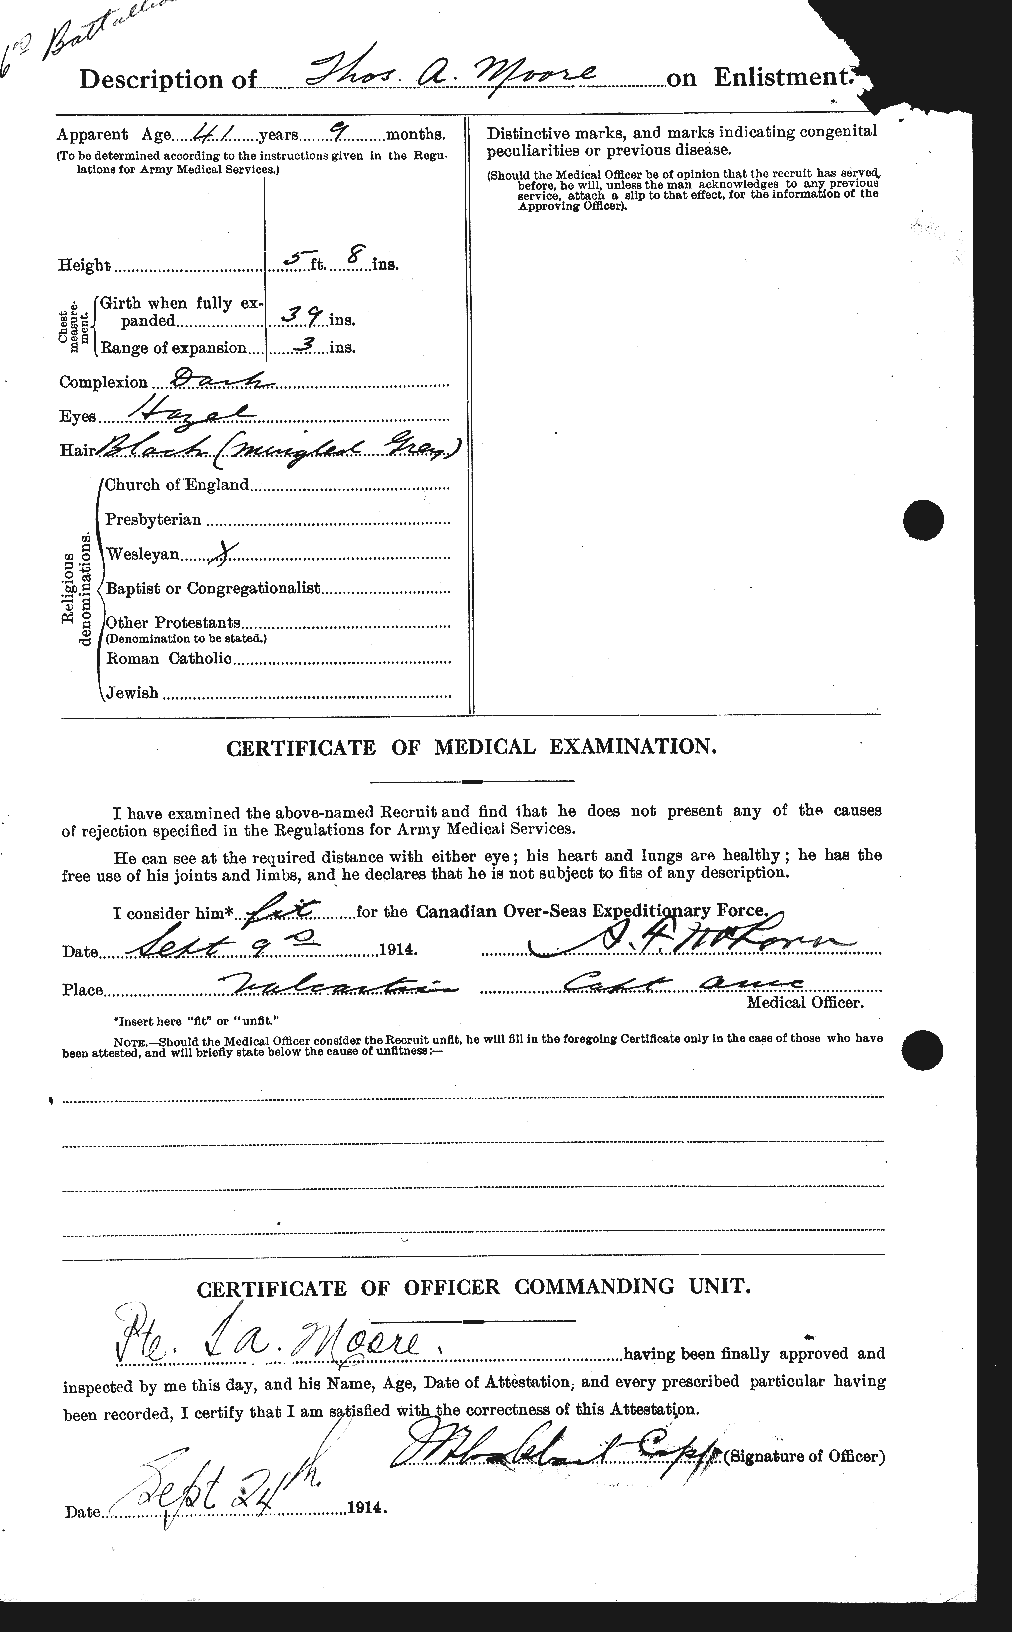 Personnel Records of the First World War - CEF 505640b